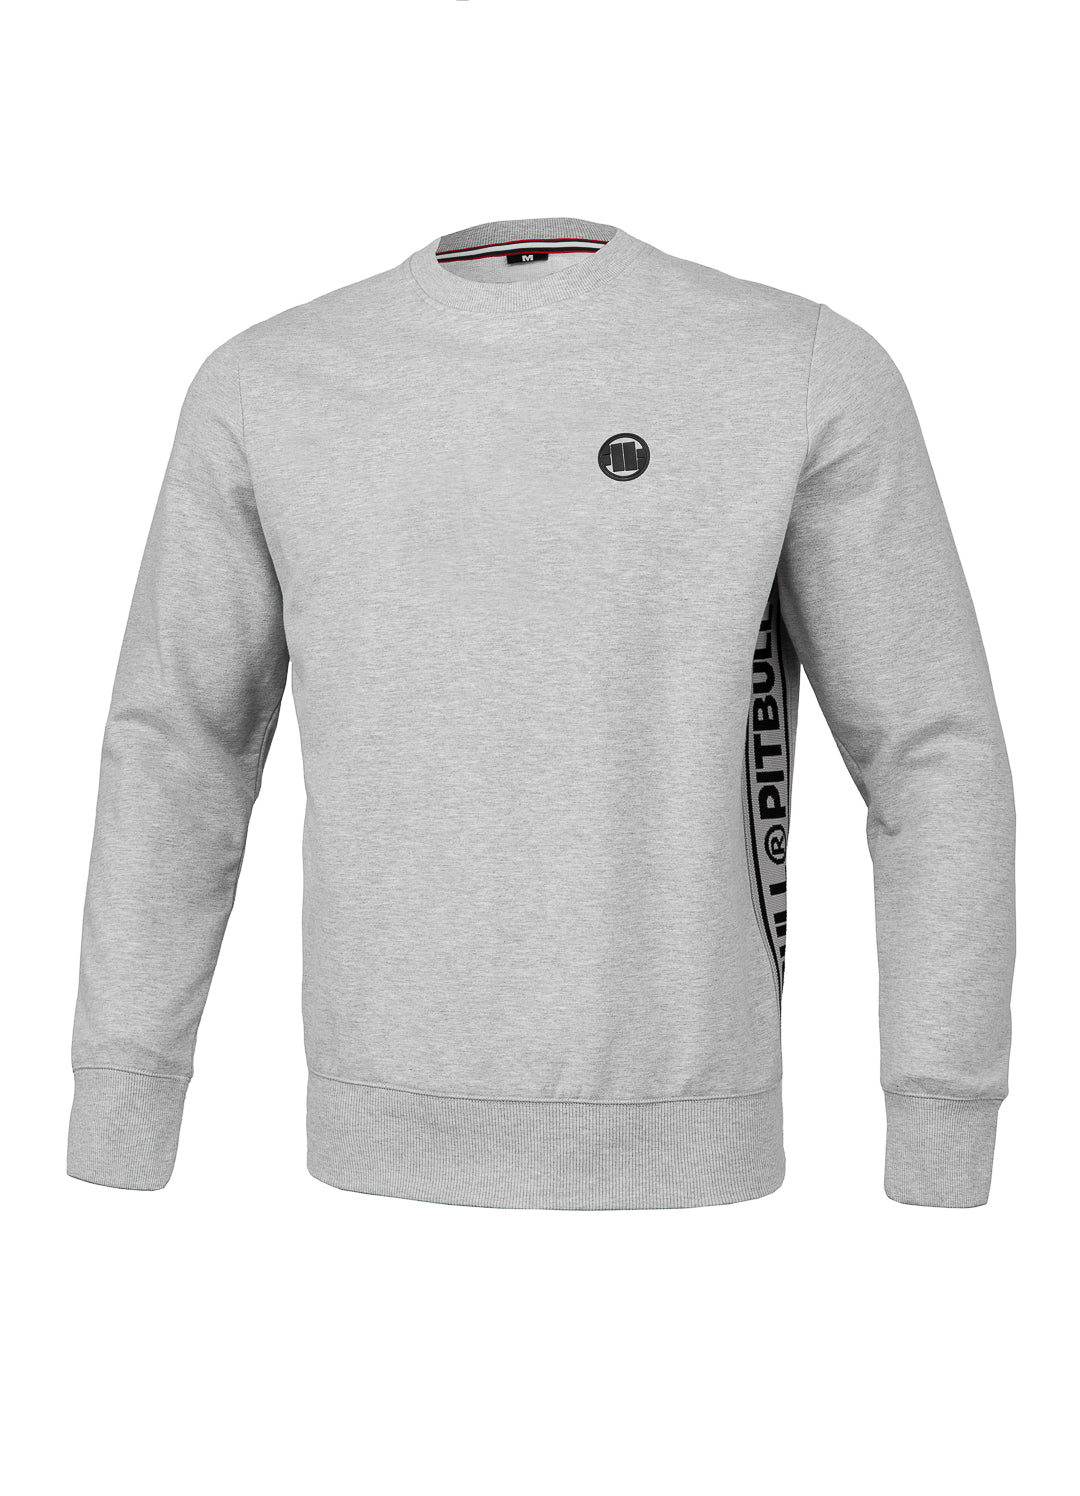 Crewneck French Terry ASCOT Grey